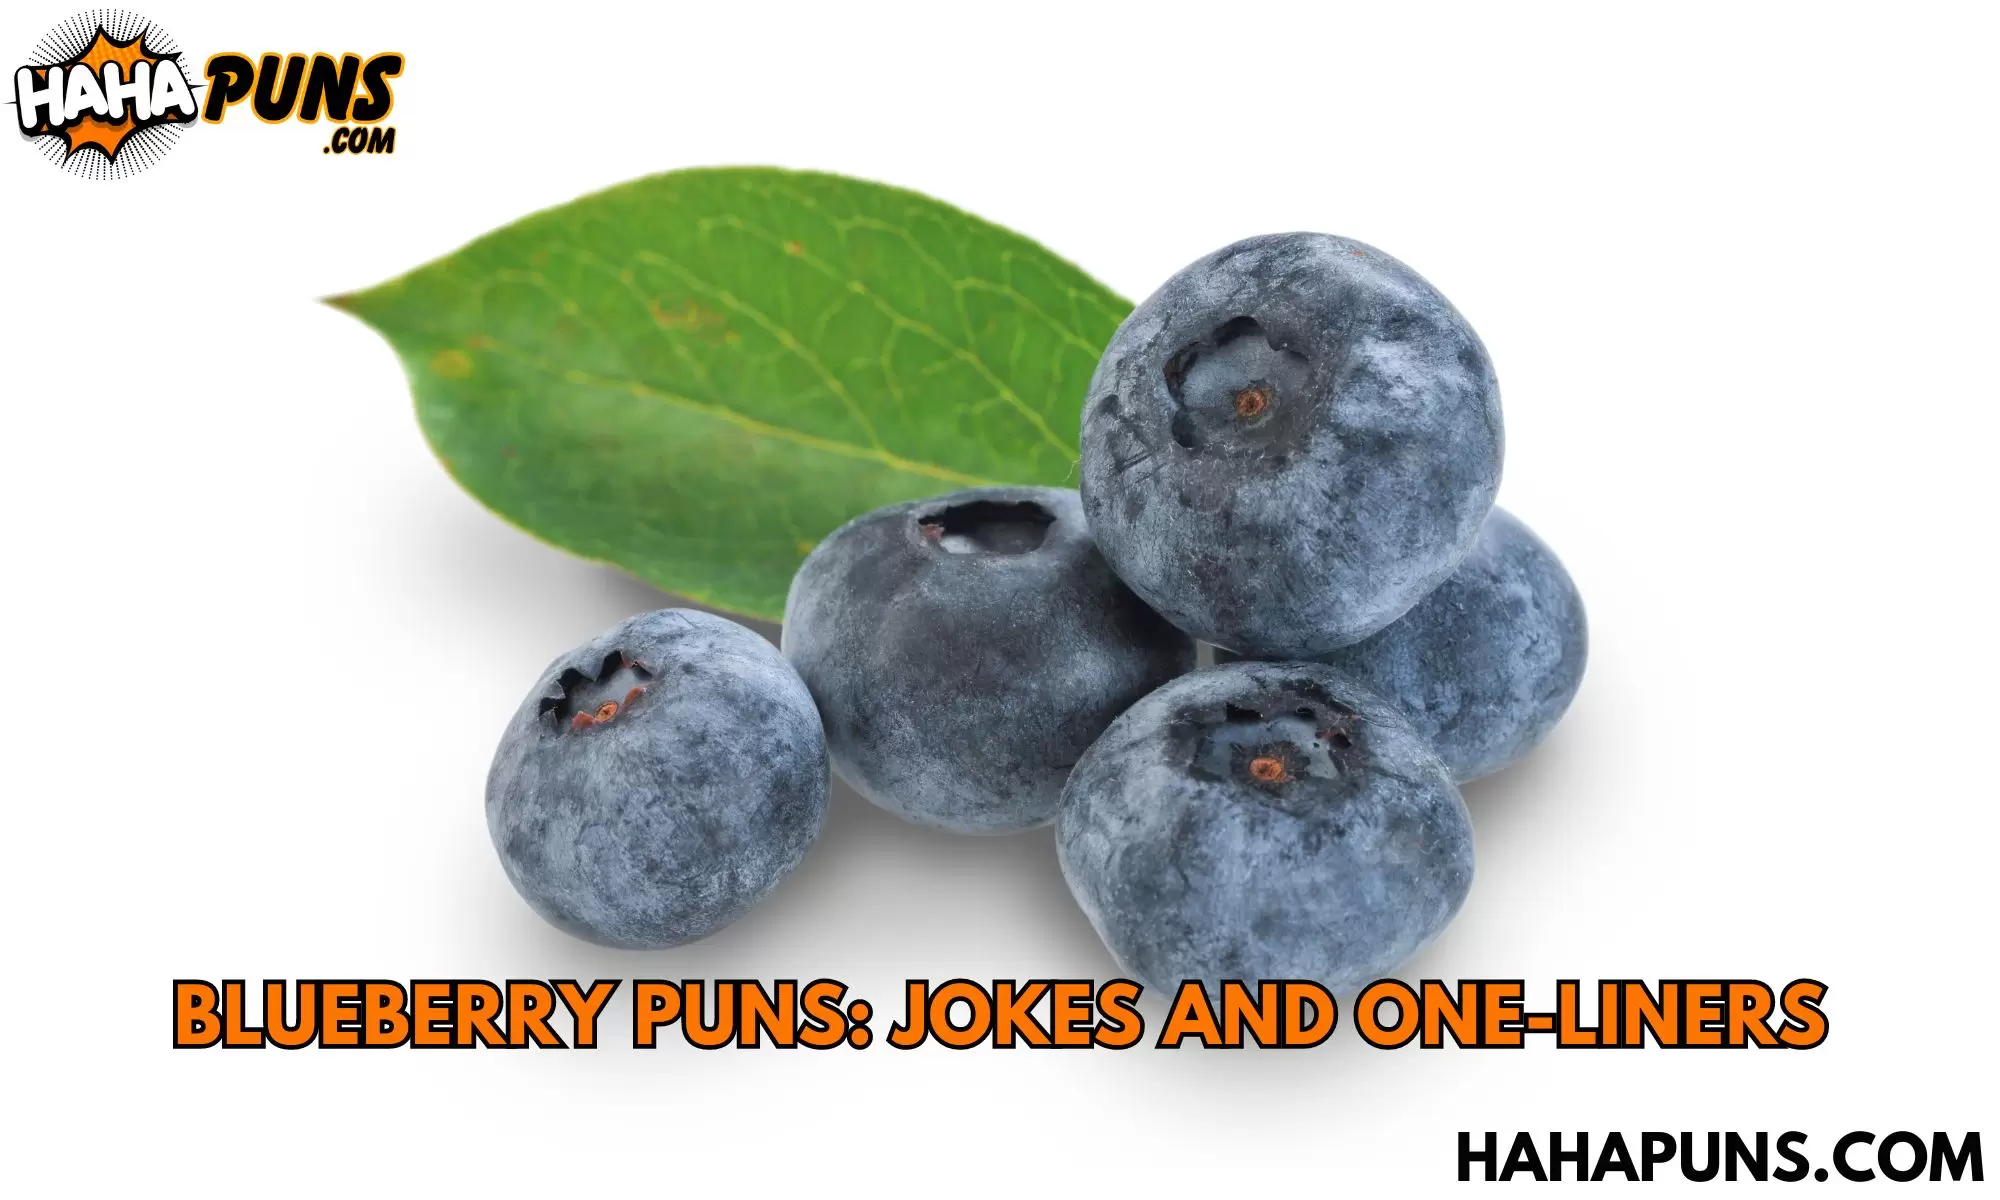 Blueberry Puns: Jokes And One-Liners